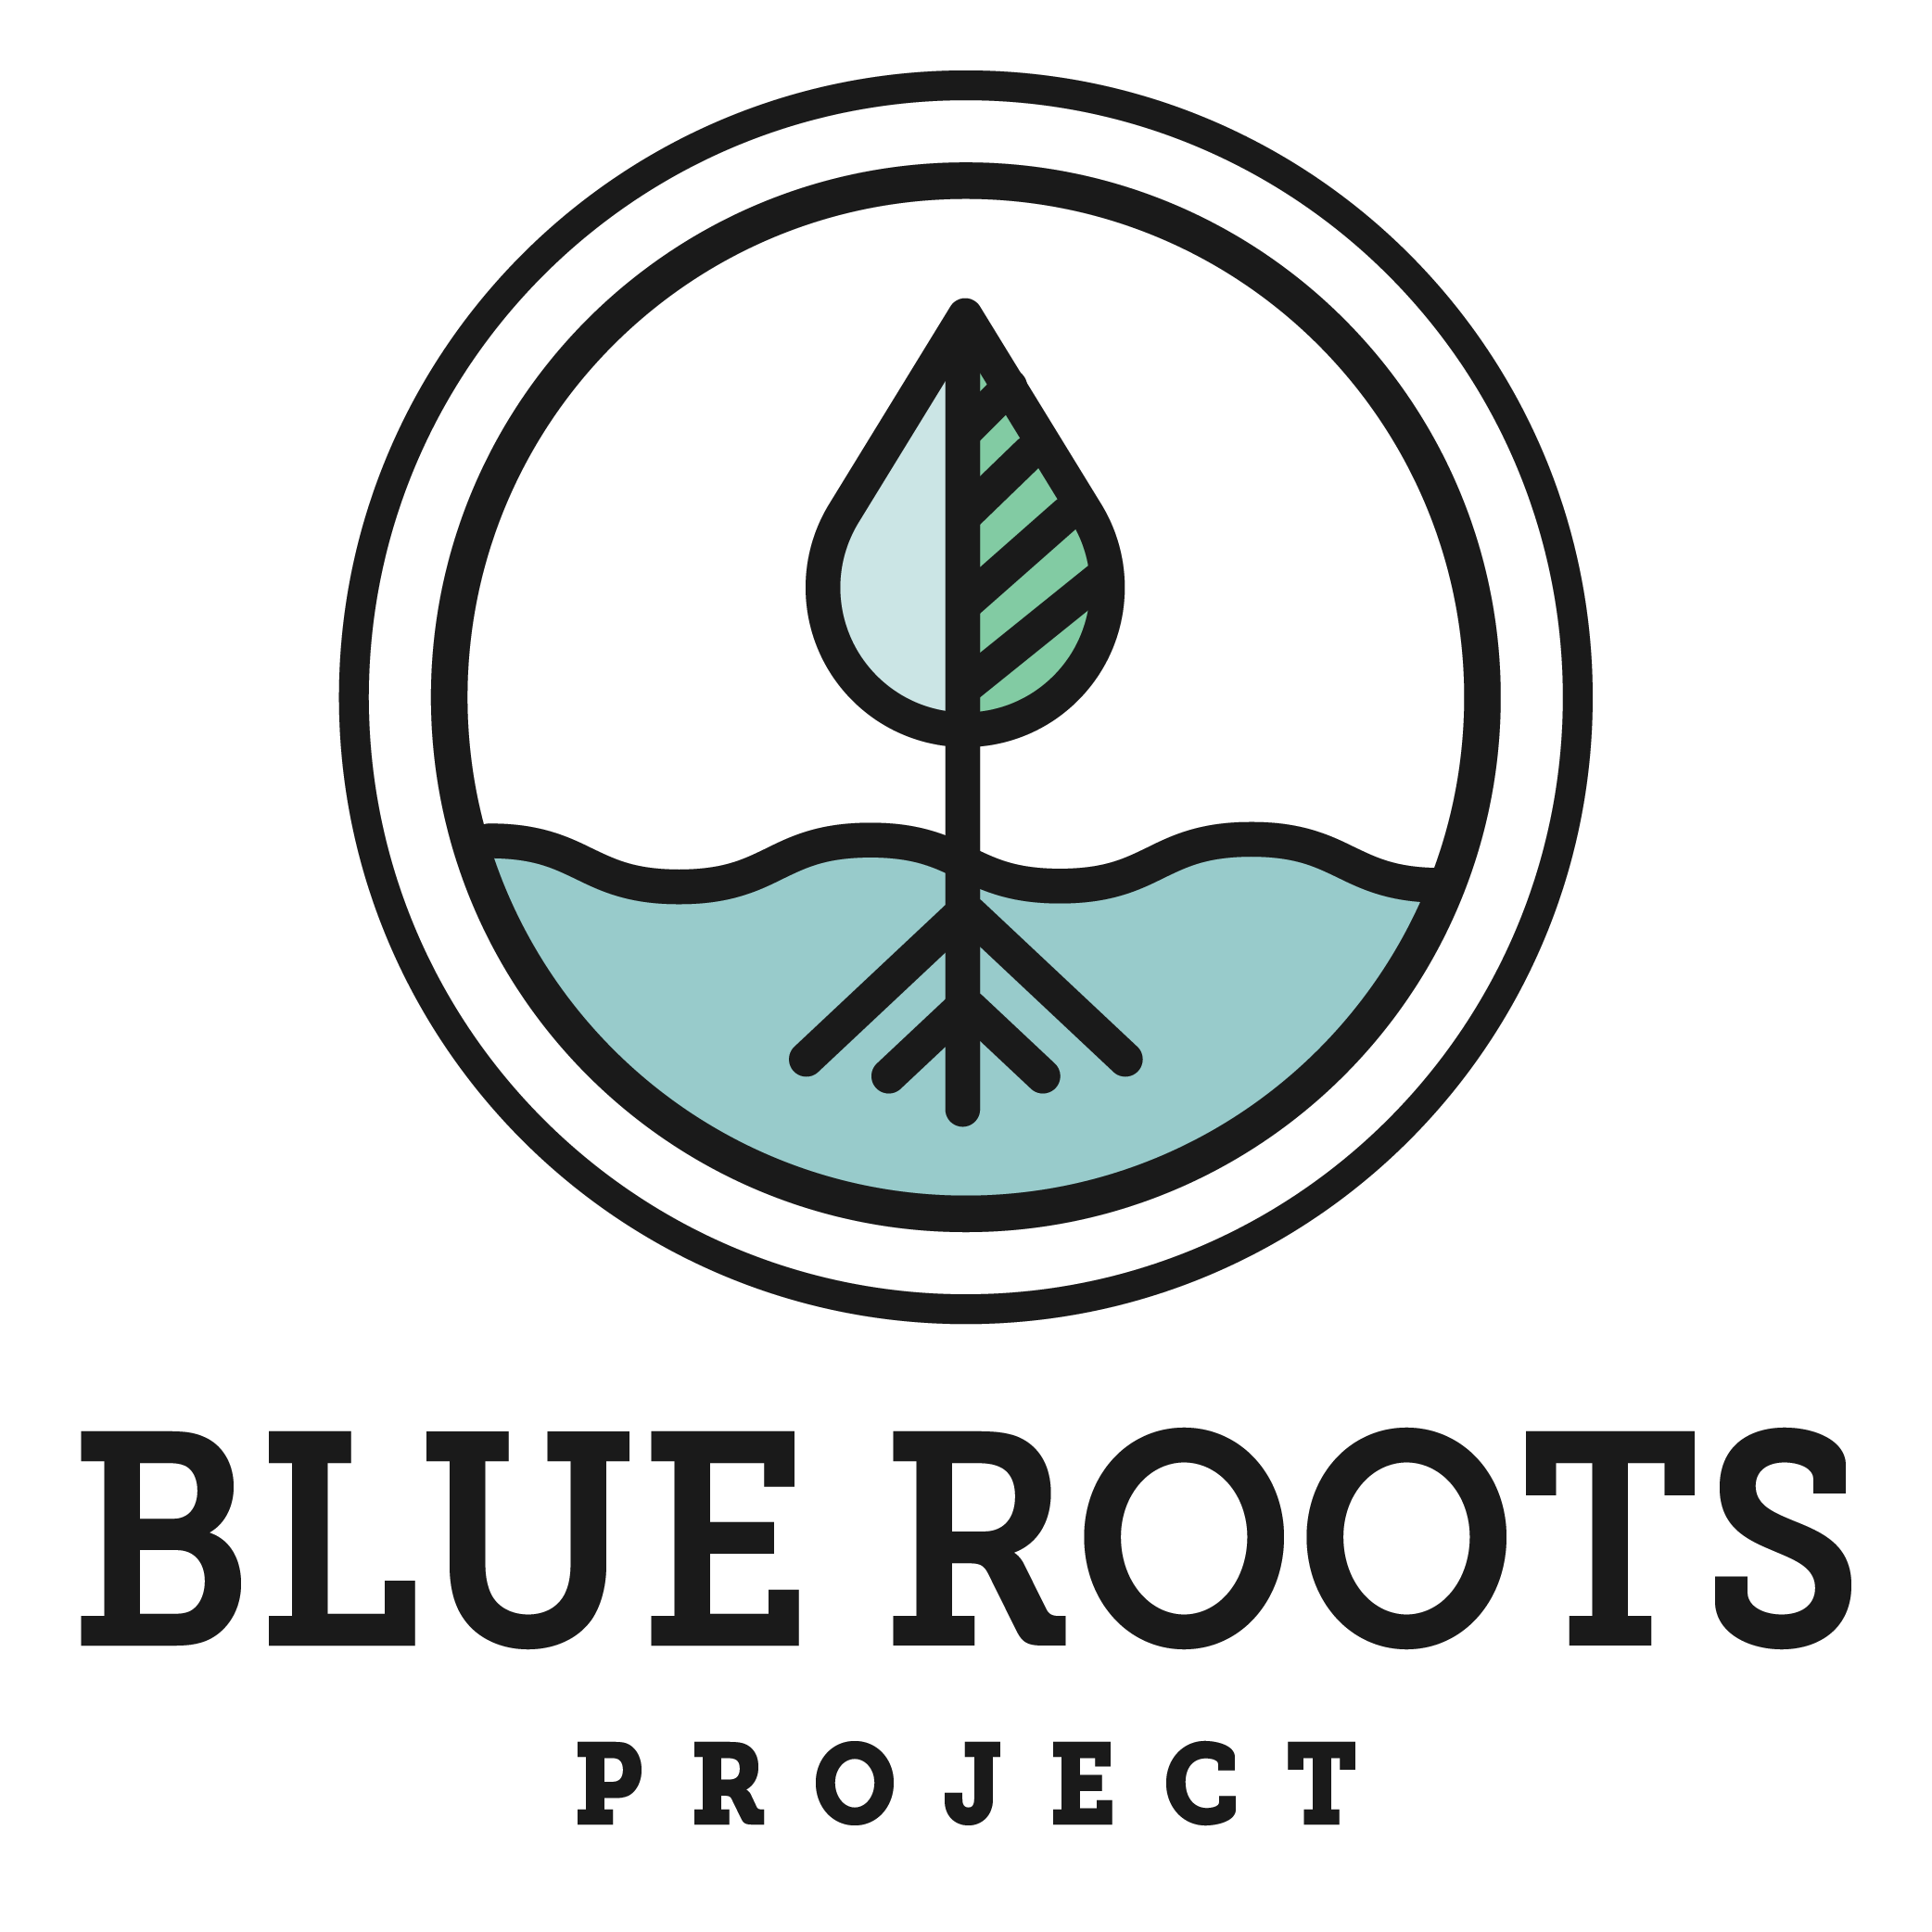 Roots Logo - Blue Roots Project: share your story about the value of water